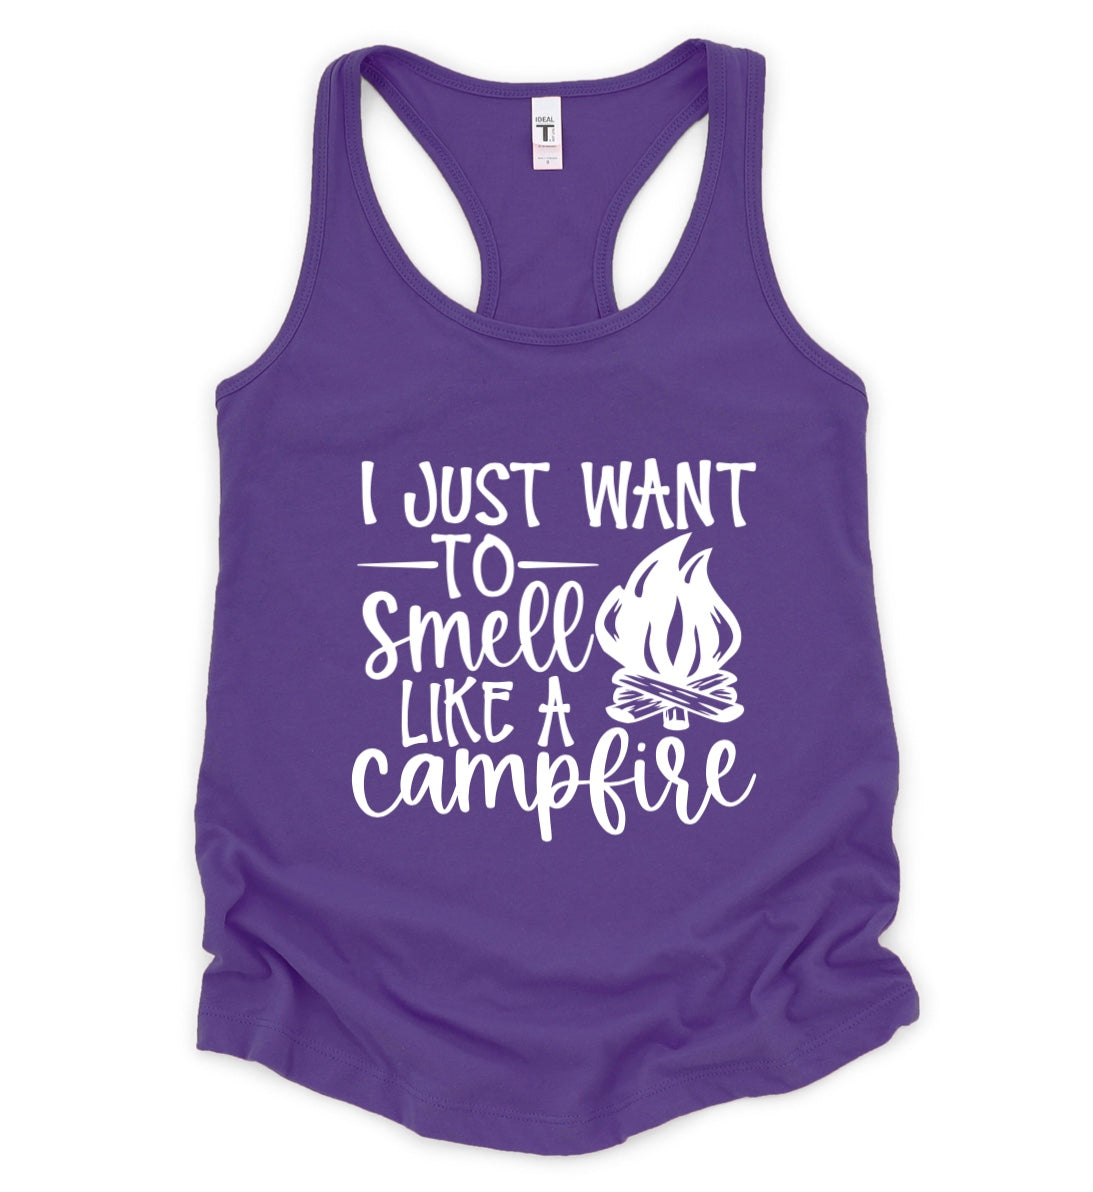 I just want to smell like a campfire racerback tank top 